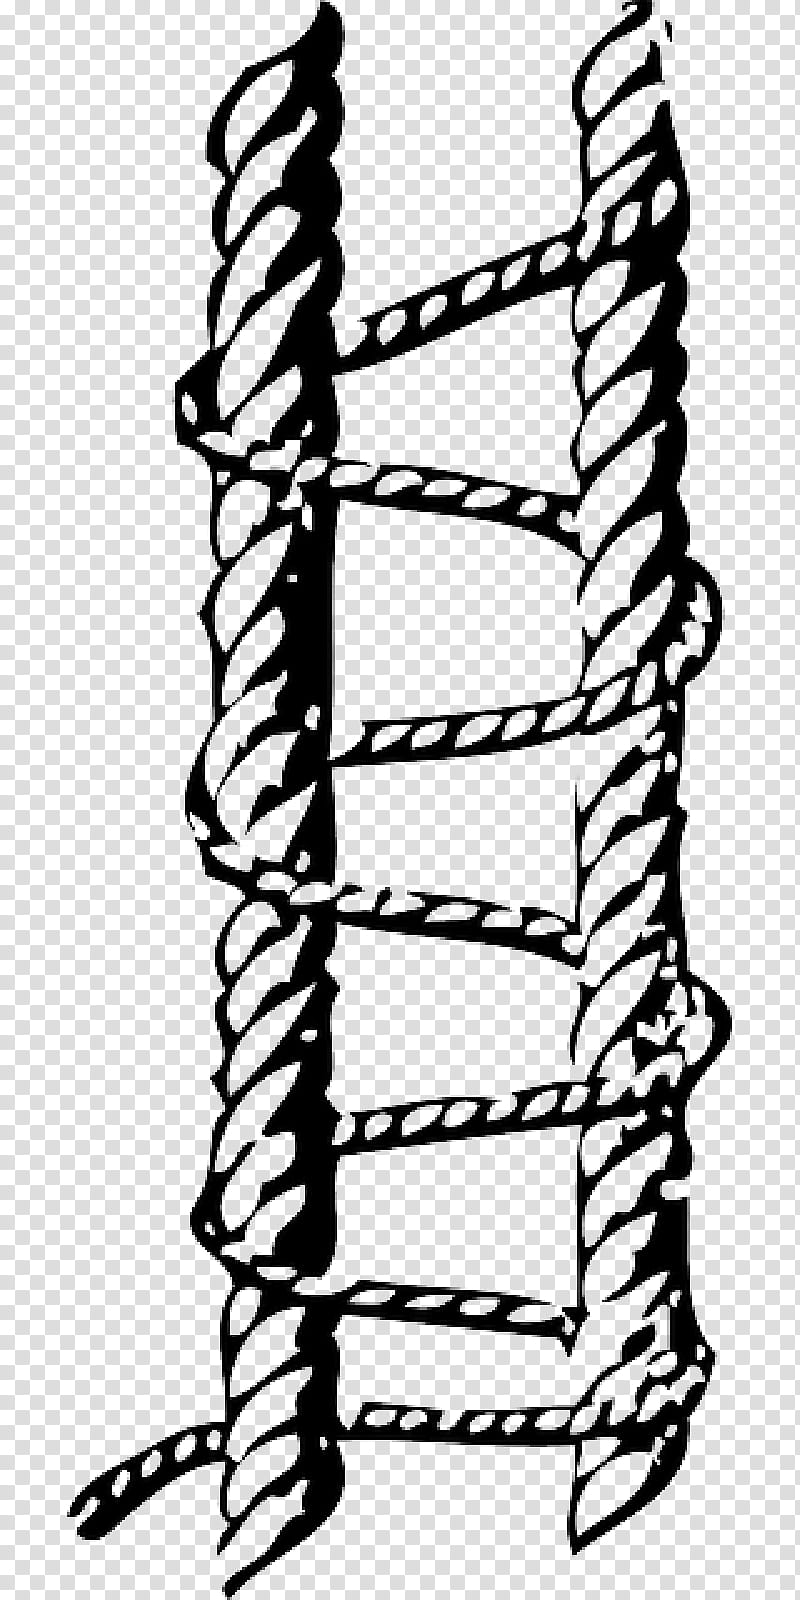 Ladder, Knot, Seizing, Rope Splicing, Half Hitch, Celtic Knot, Bowline, Bight transparent background PNG clipart